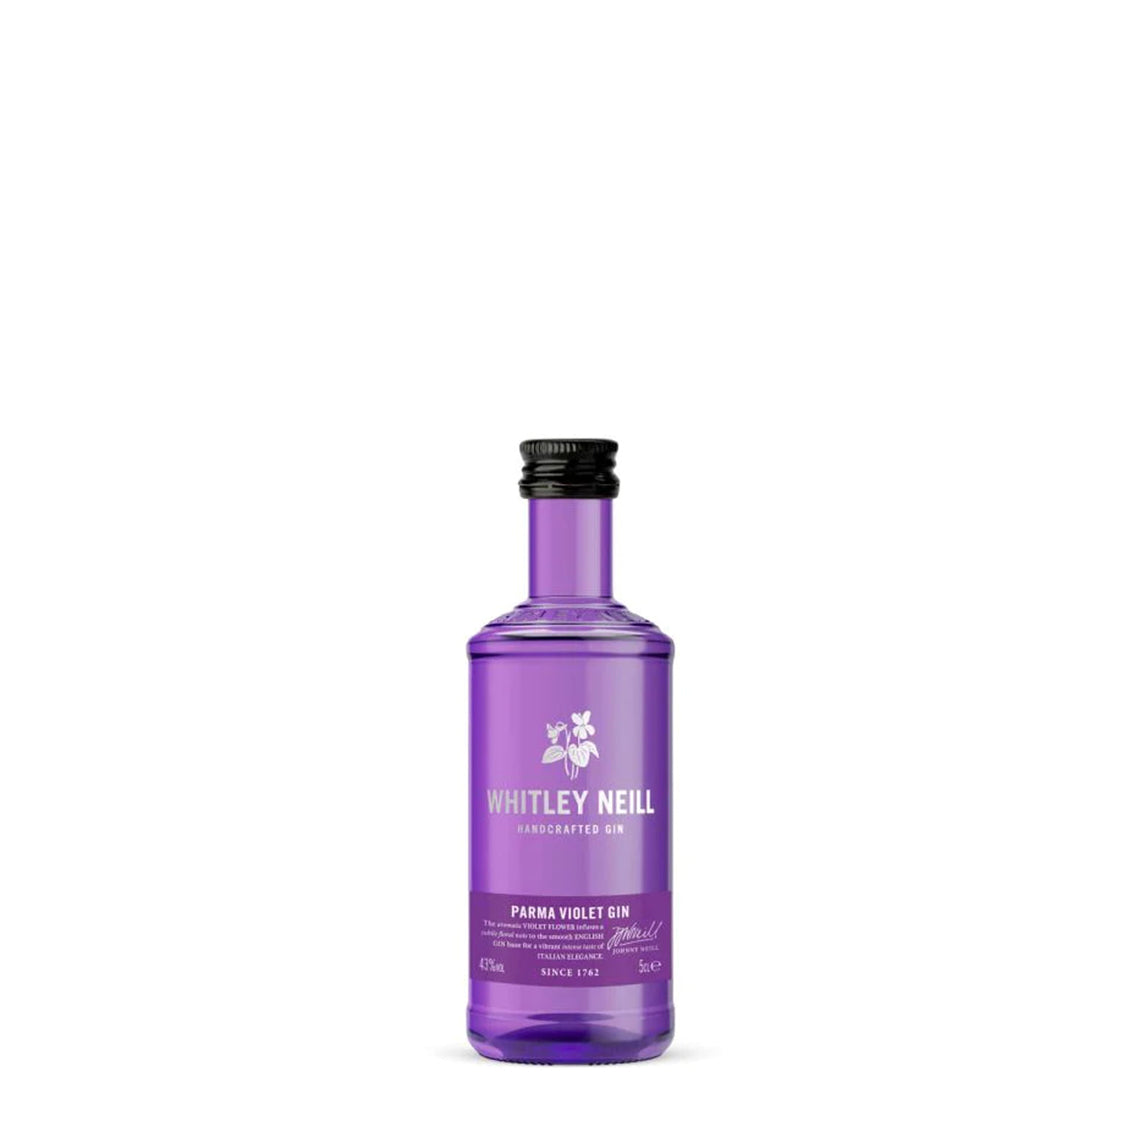 Whitley Neill Parma Violet Gin, 5cl - Miniature